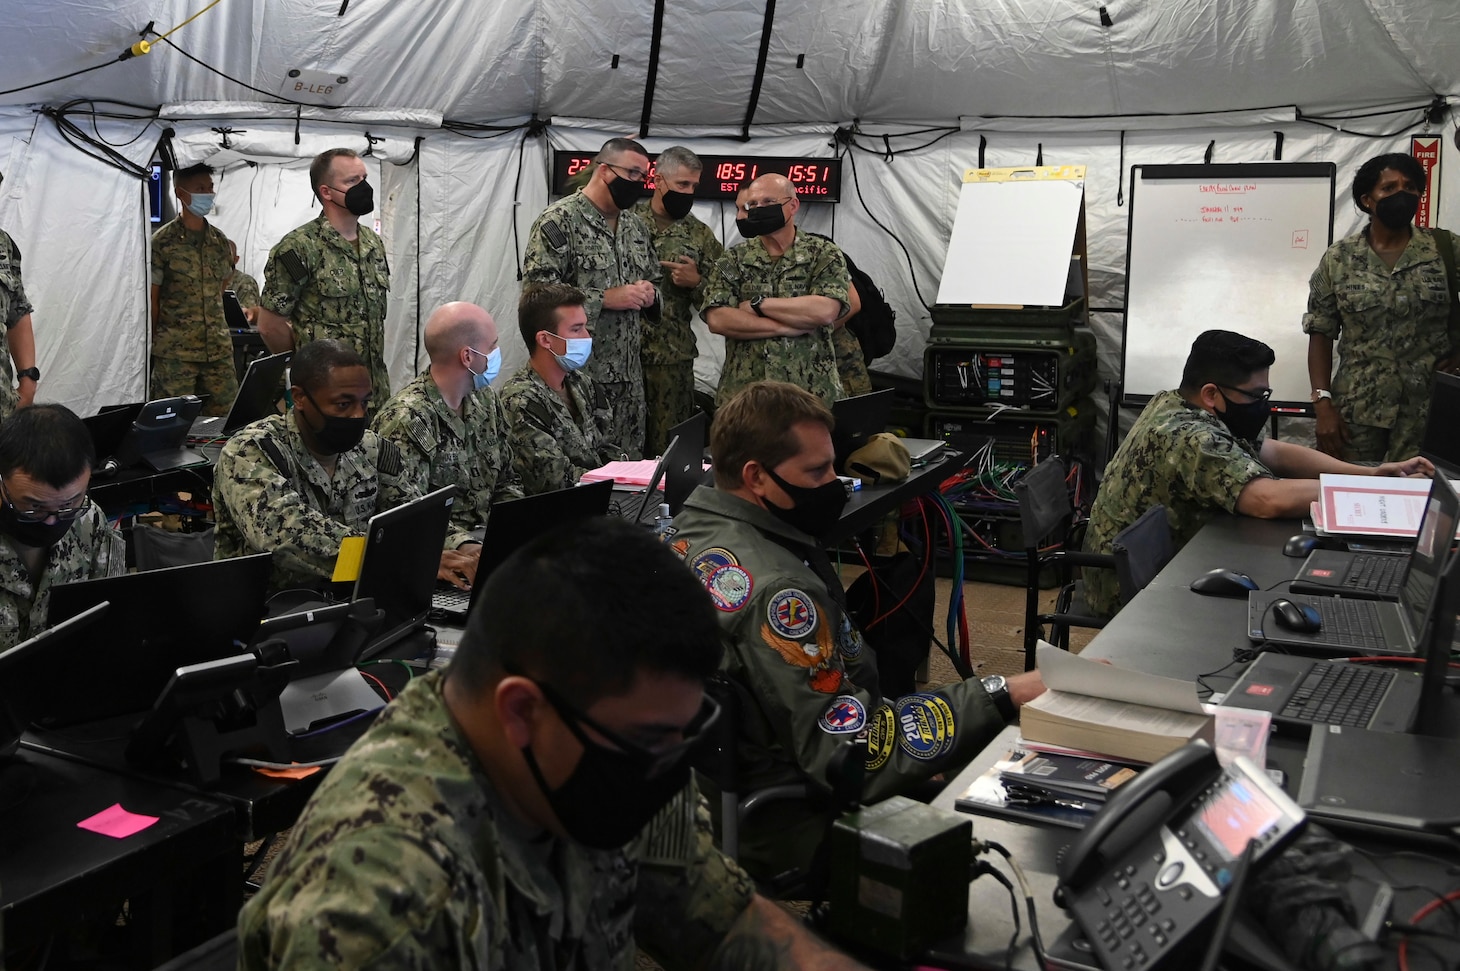 Commander of U.S. 3rd Fleet Vice Adm. Steve Koehler leads Chief of Naval Operations Adm. Mike Gilday on a tour of 3rd Fleet’s expeditionary maritime operations center at Joint Base Pearl Harbor-Hickam during Large-Scale Exercise (LSE) 2021, August 14.